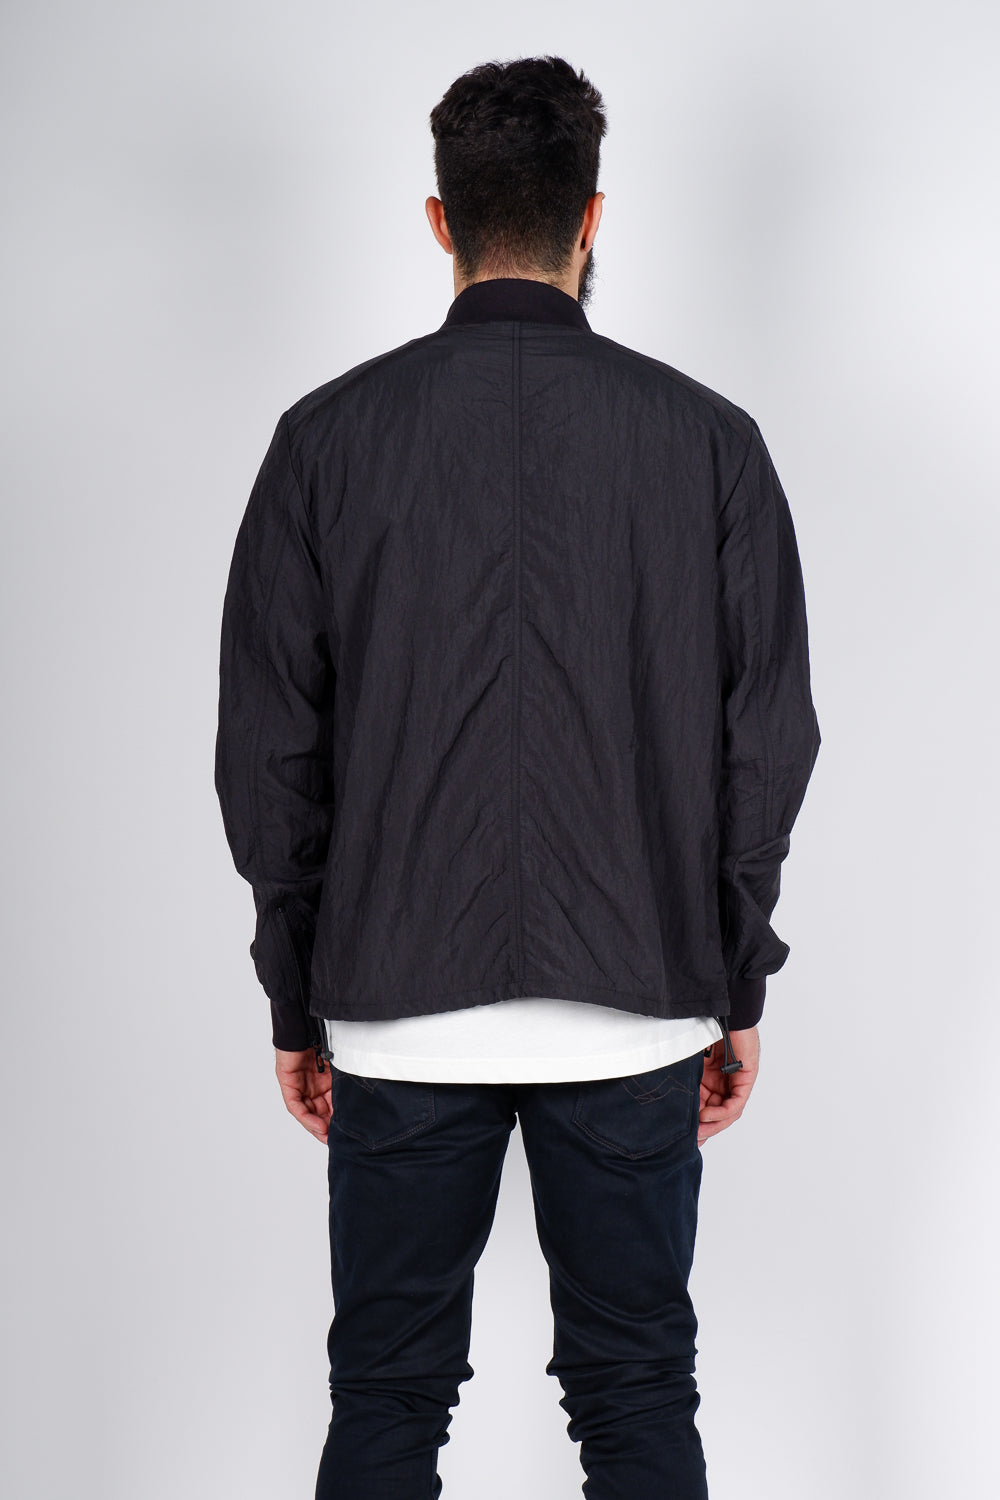 Buy the Antony Morato Nylon Regular Fit Jacket Black at Intro. Spend £50 for free UK delivery. Official stockists. We ship worldwide.